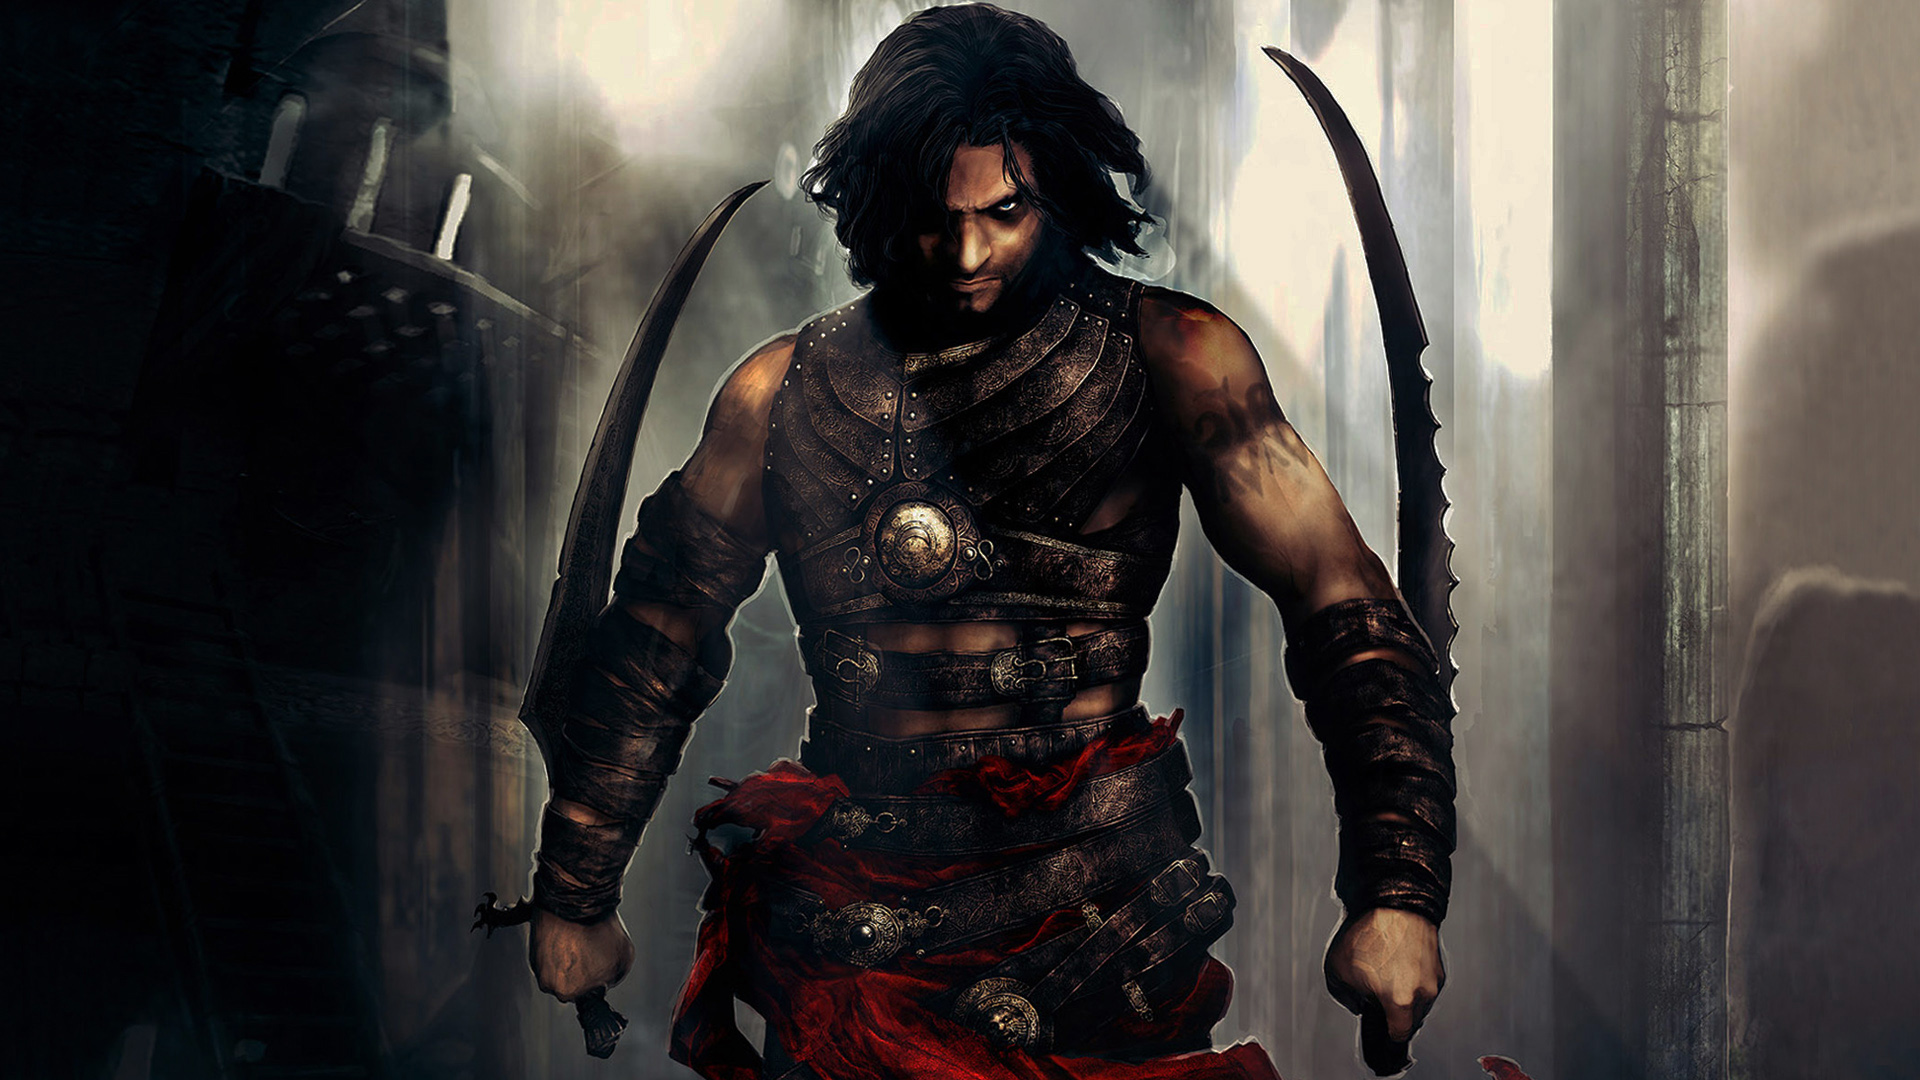 Prince of Persia: Warrior Within – Hardcore Gaming 101